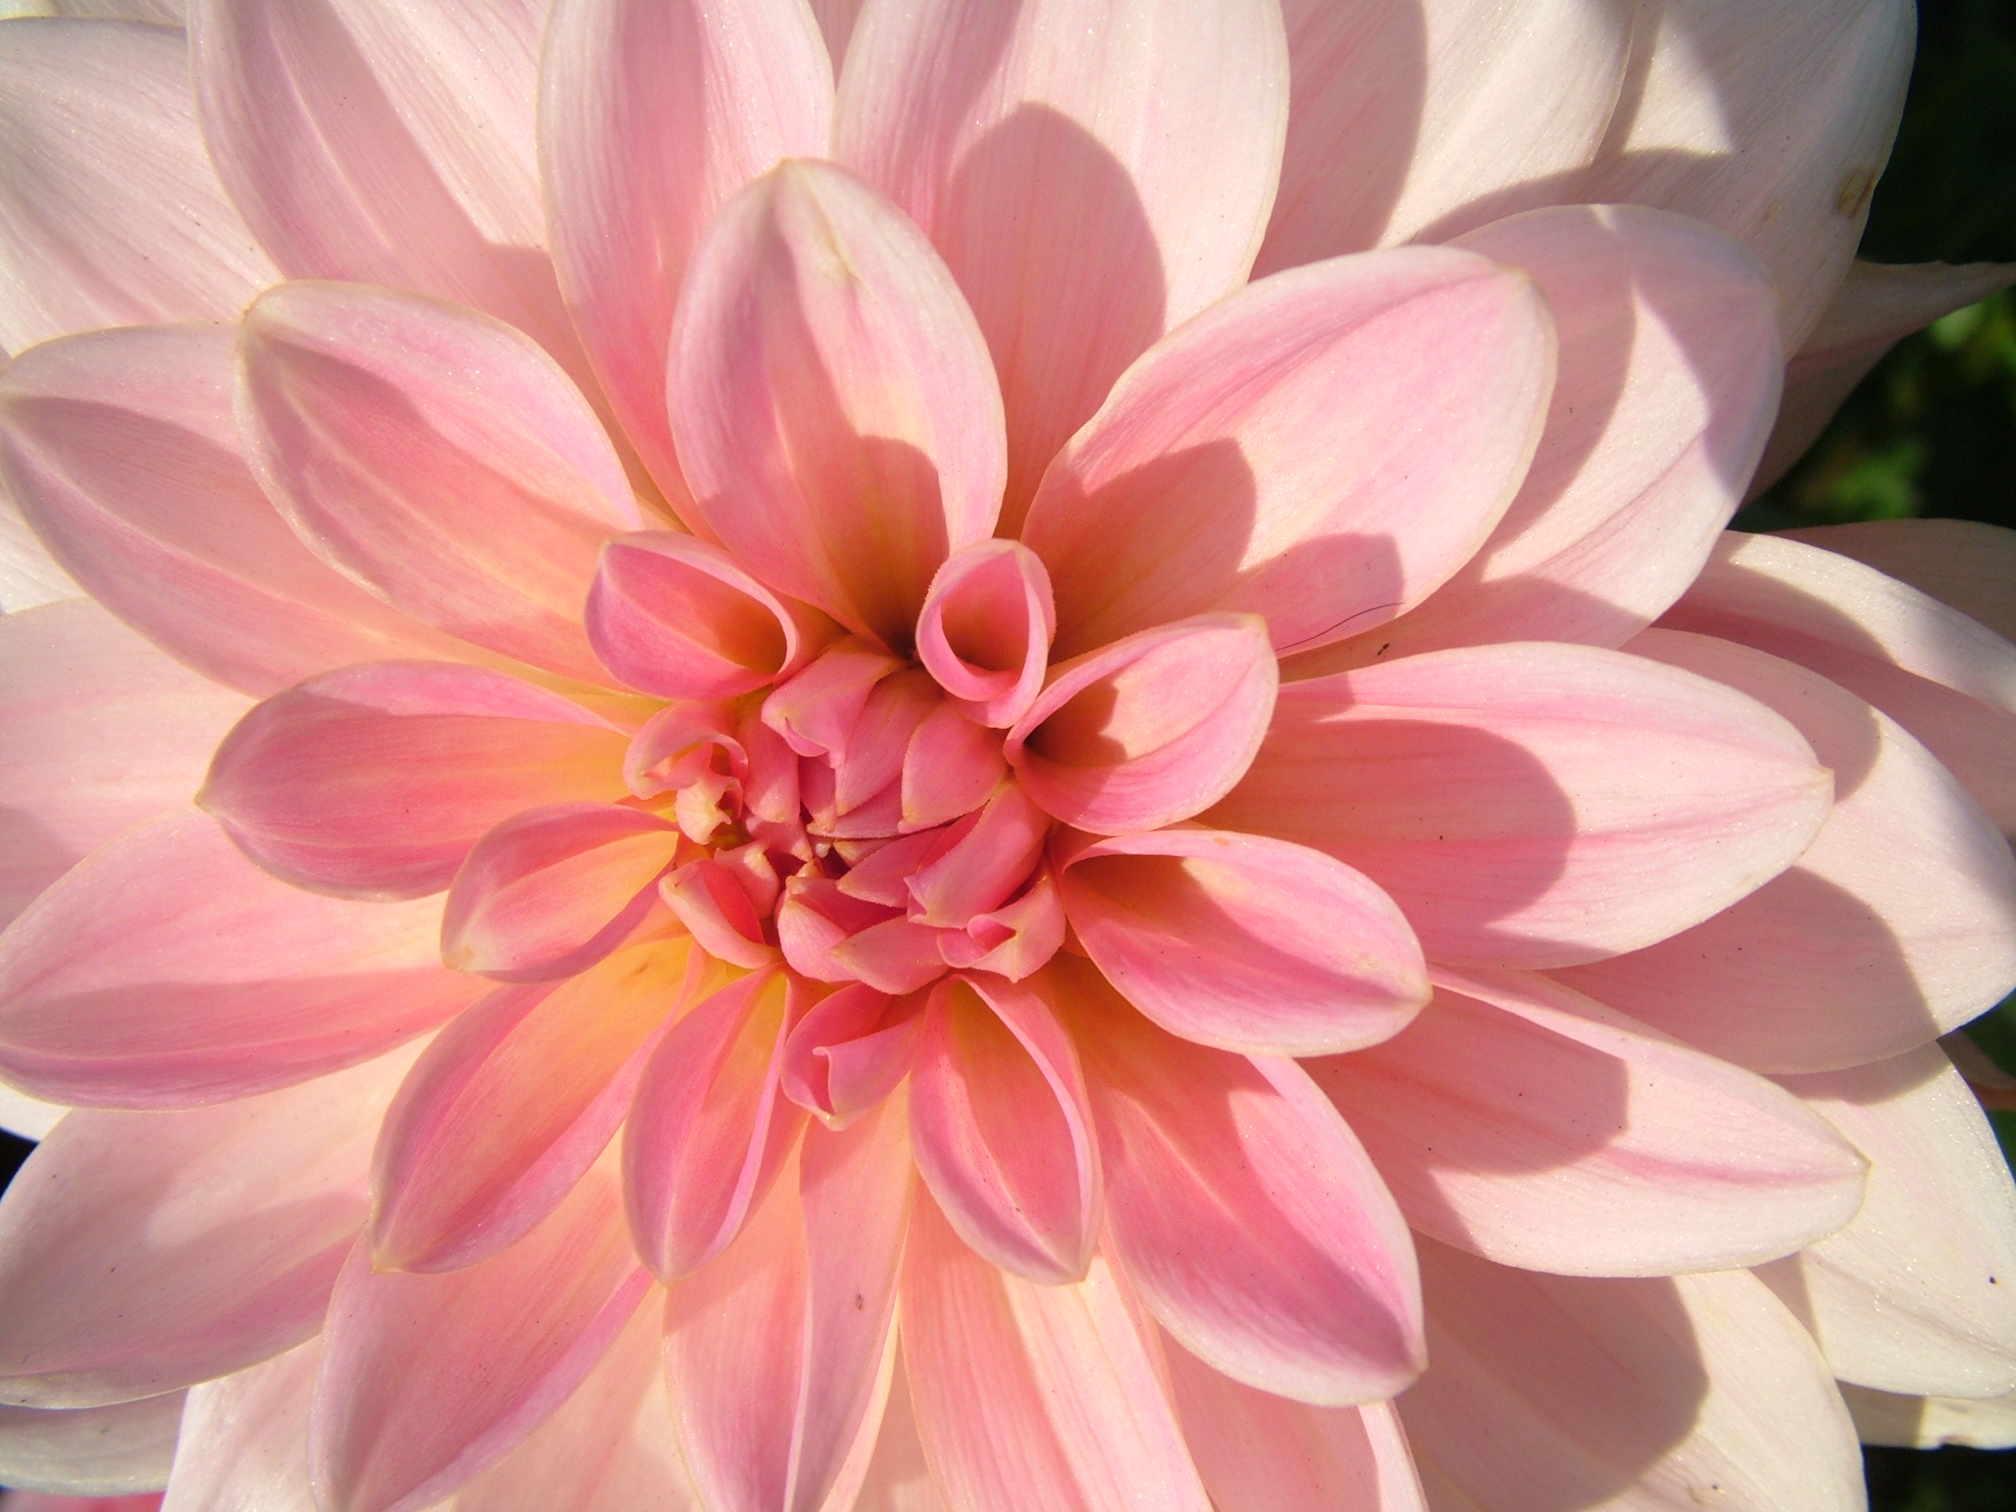 Flowers Pale Pink and Yellow Dahlia wallpapers (Desktop, Phone ...